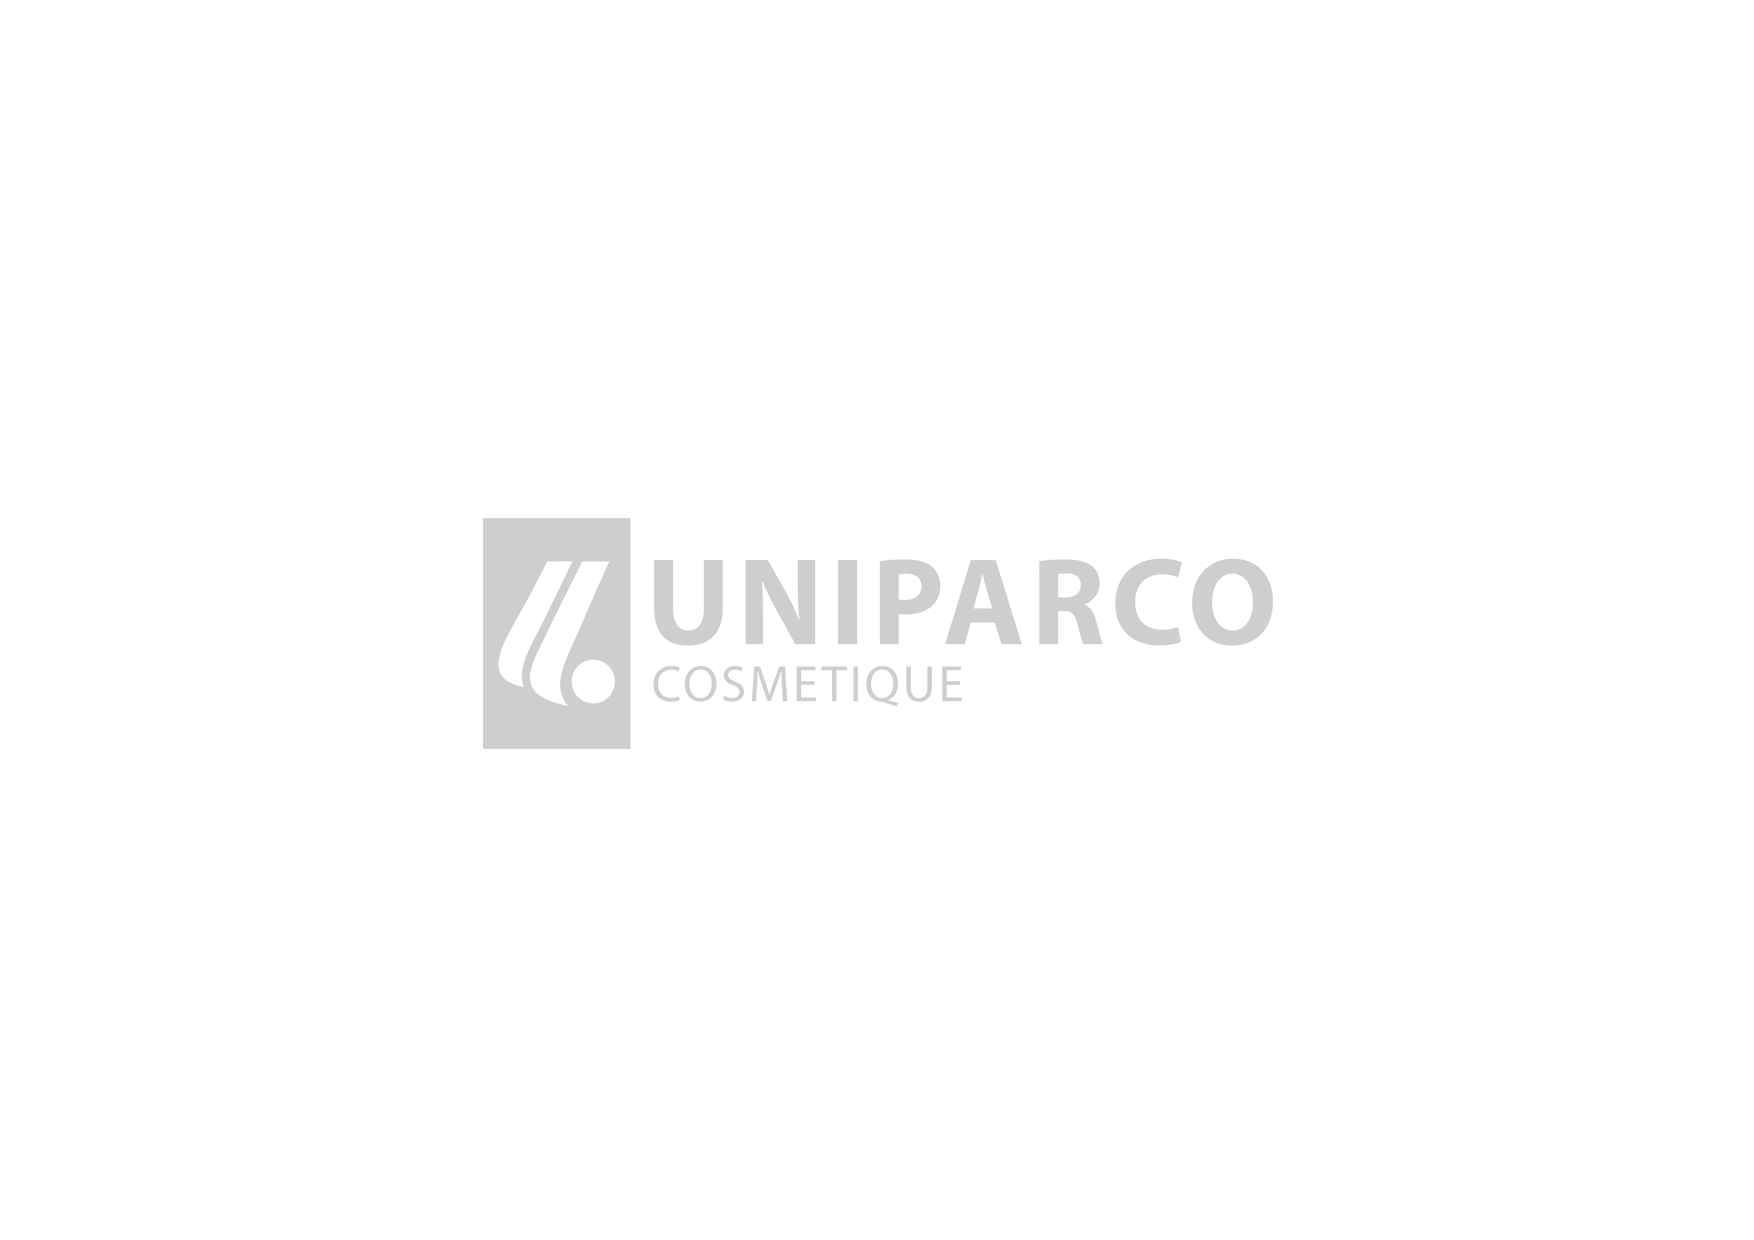 UNIPARCO